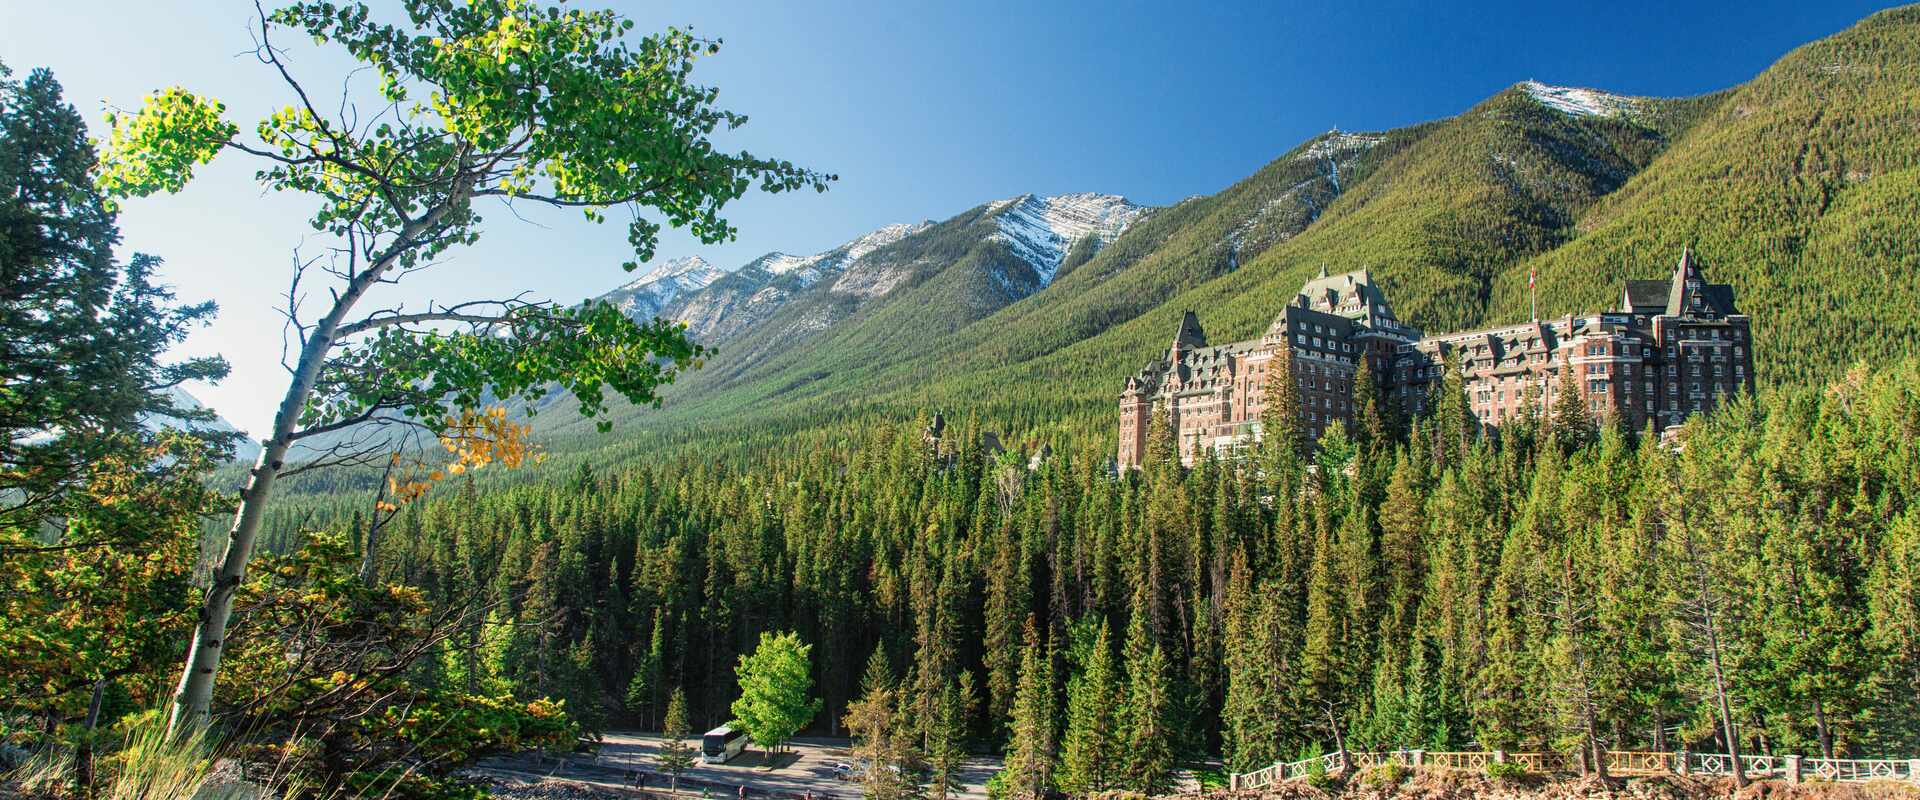 Fairmont springs surrounded by lush green hills and vegetation in Banff